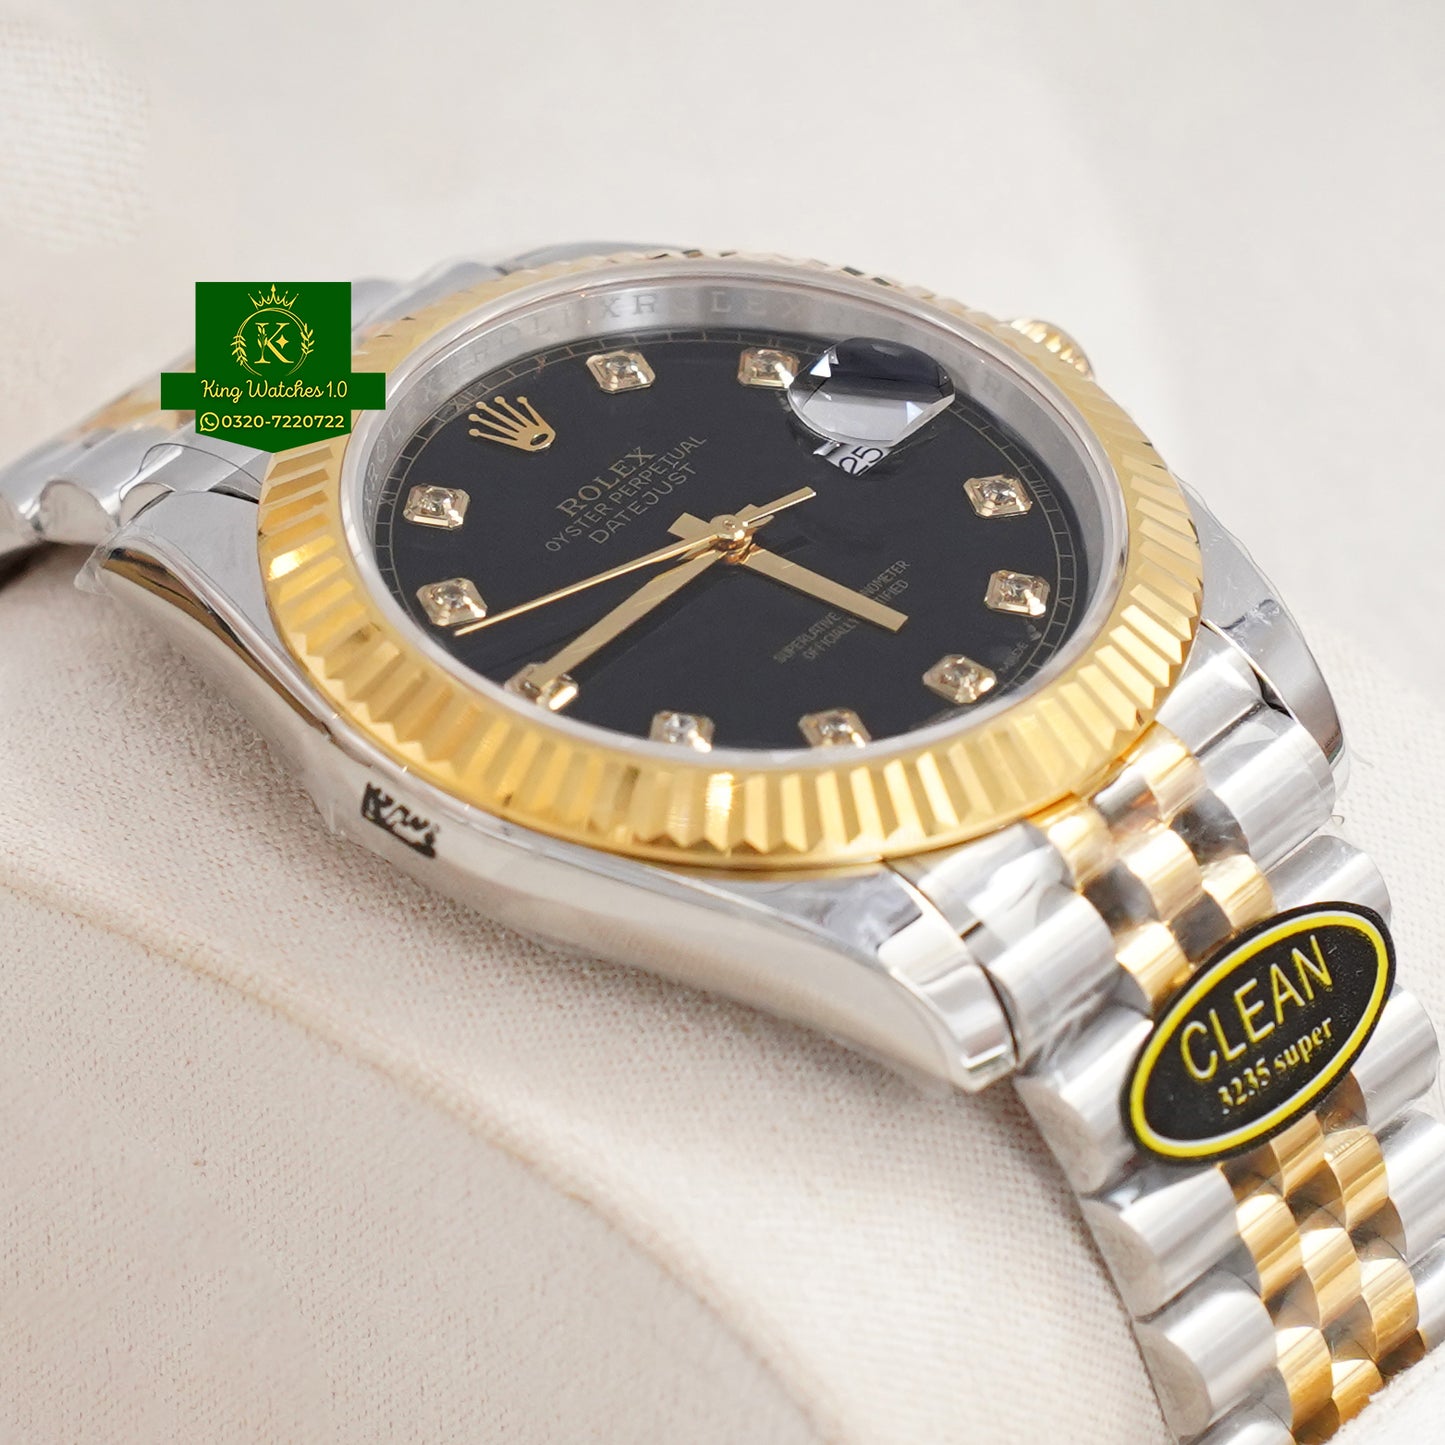 Datejust 41 Clean made